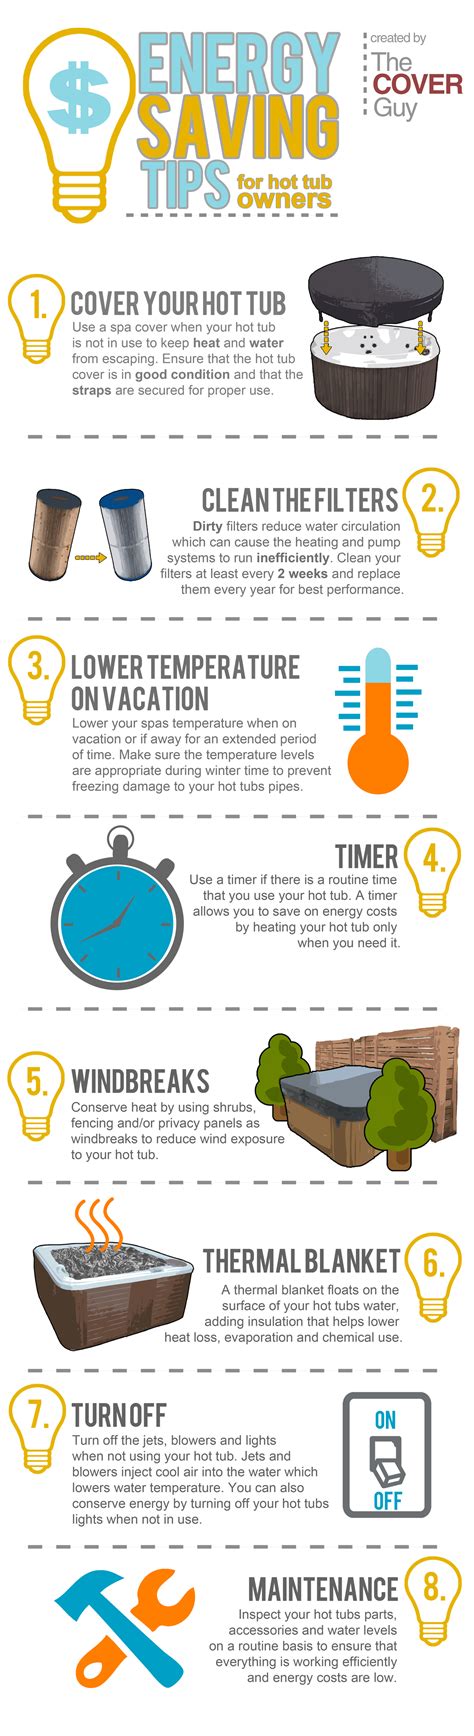 Energy Saving Tips For Hot Tub Owners Visual Ly